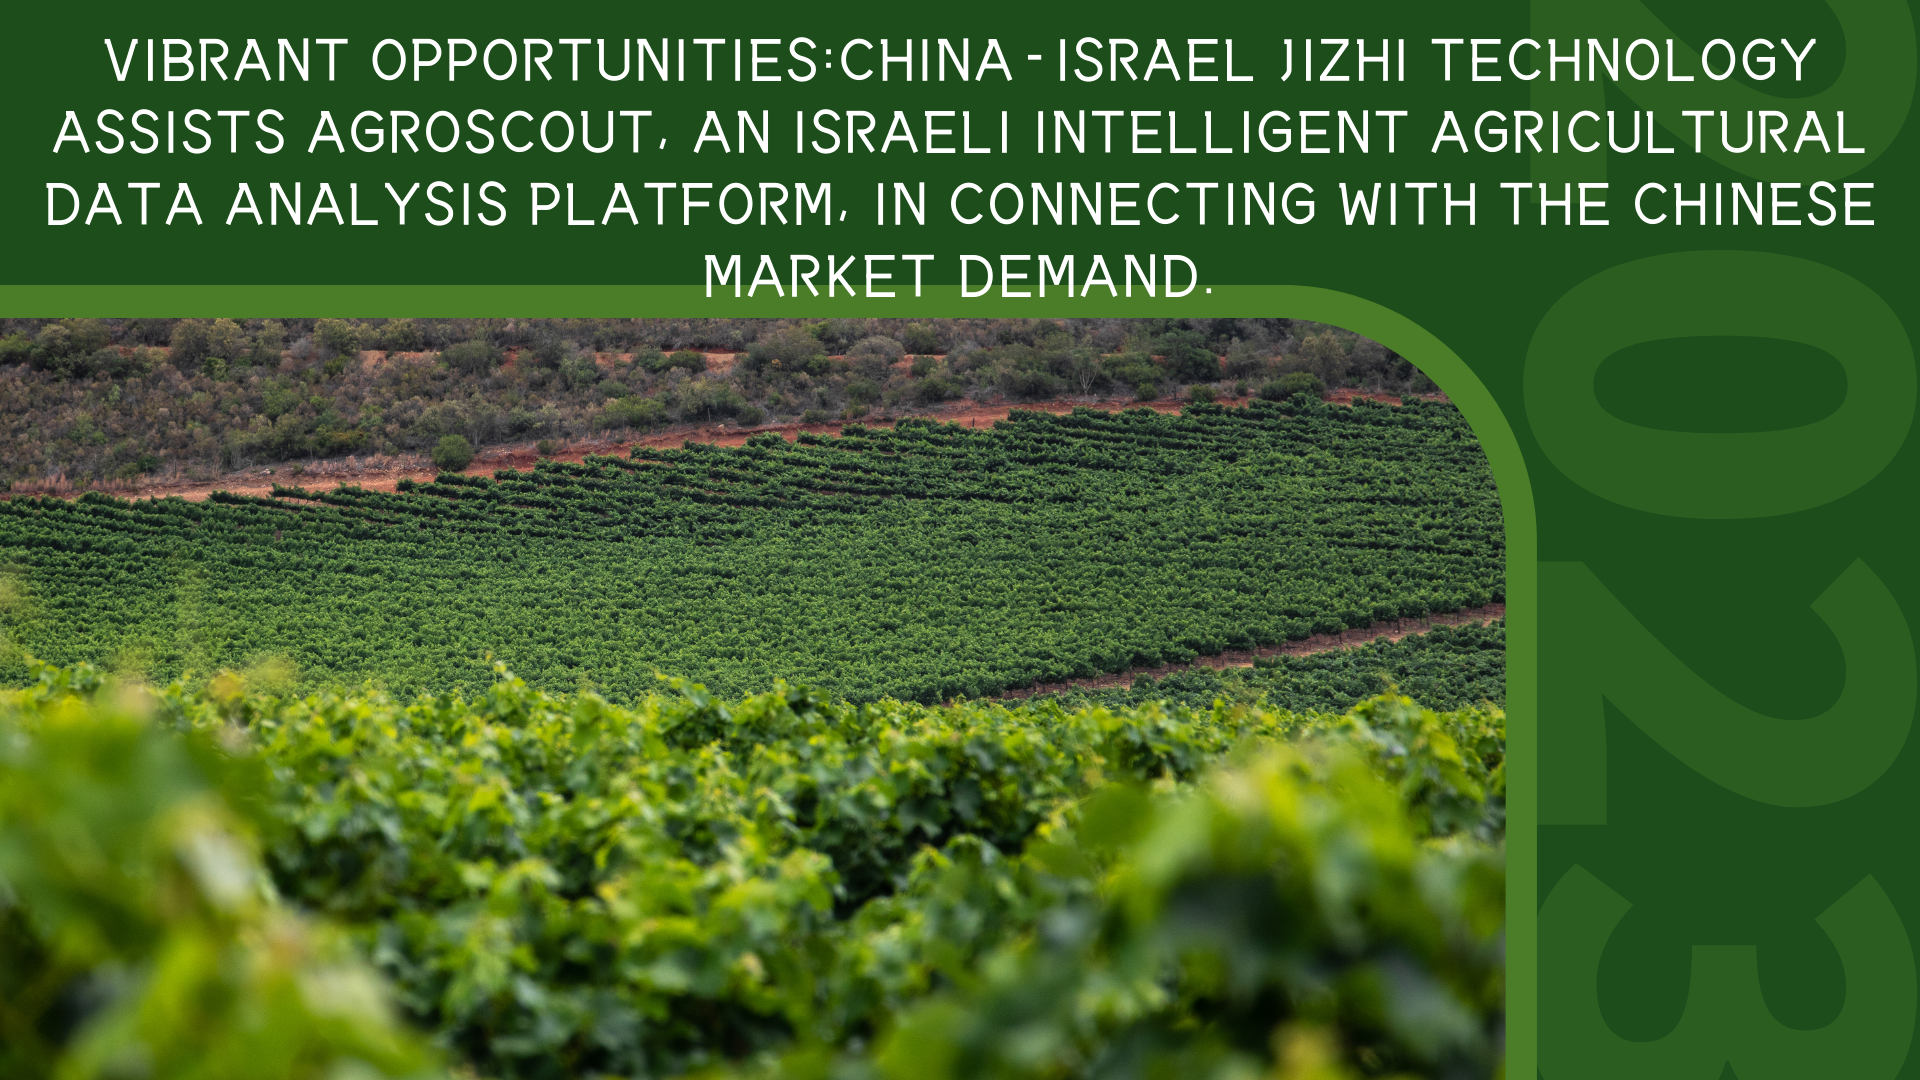 Vibrant Opportunities  China-Israel Jizhi Assists AgroScout, an Israeli Intelligent Agricultural Data Analysis Platform, in Connecting with the Chinese Market Demand..png